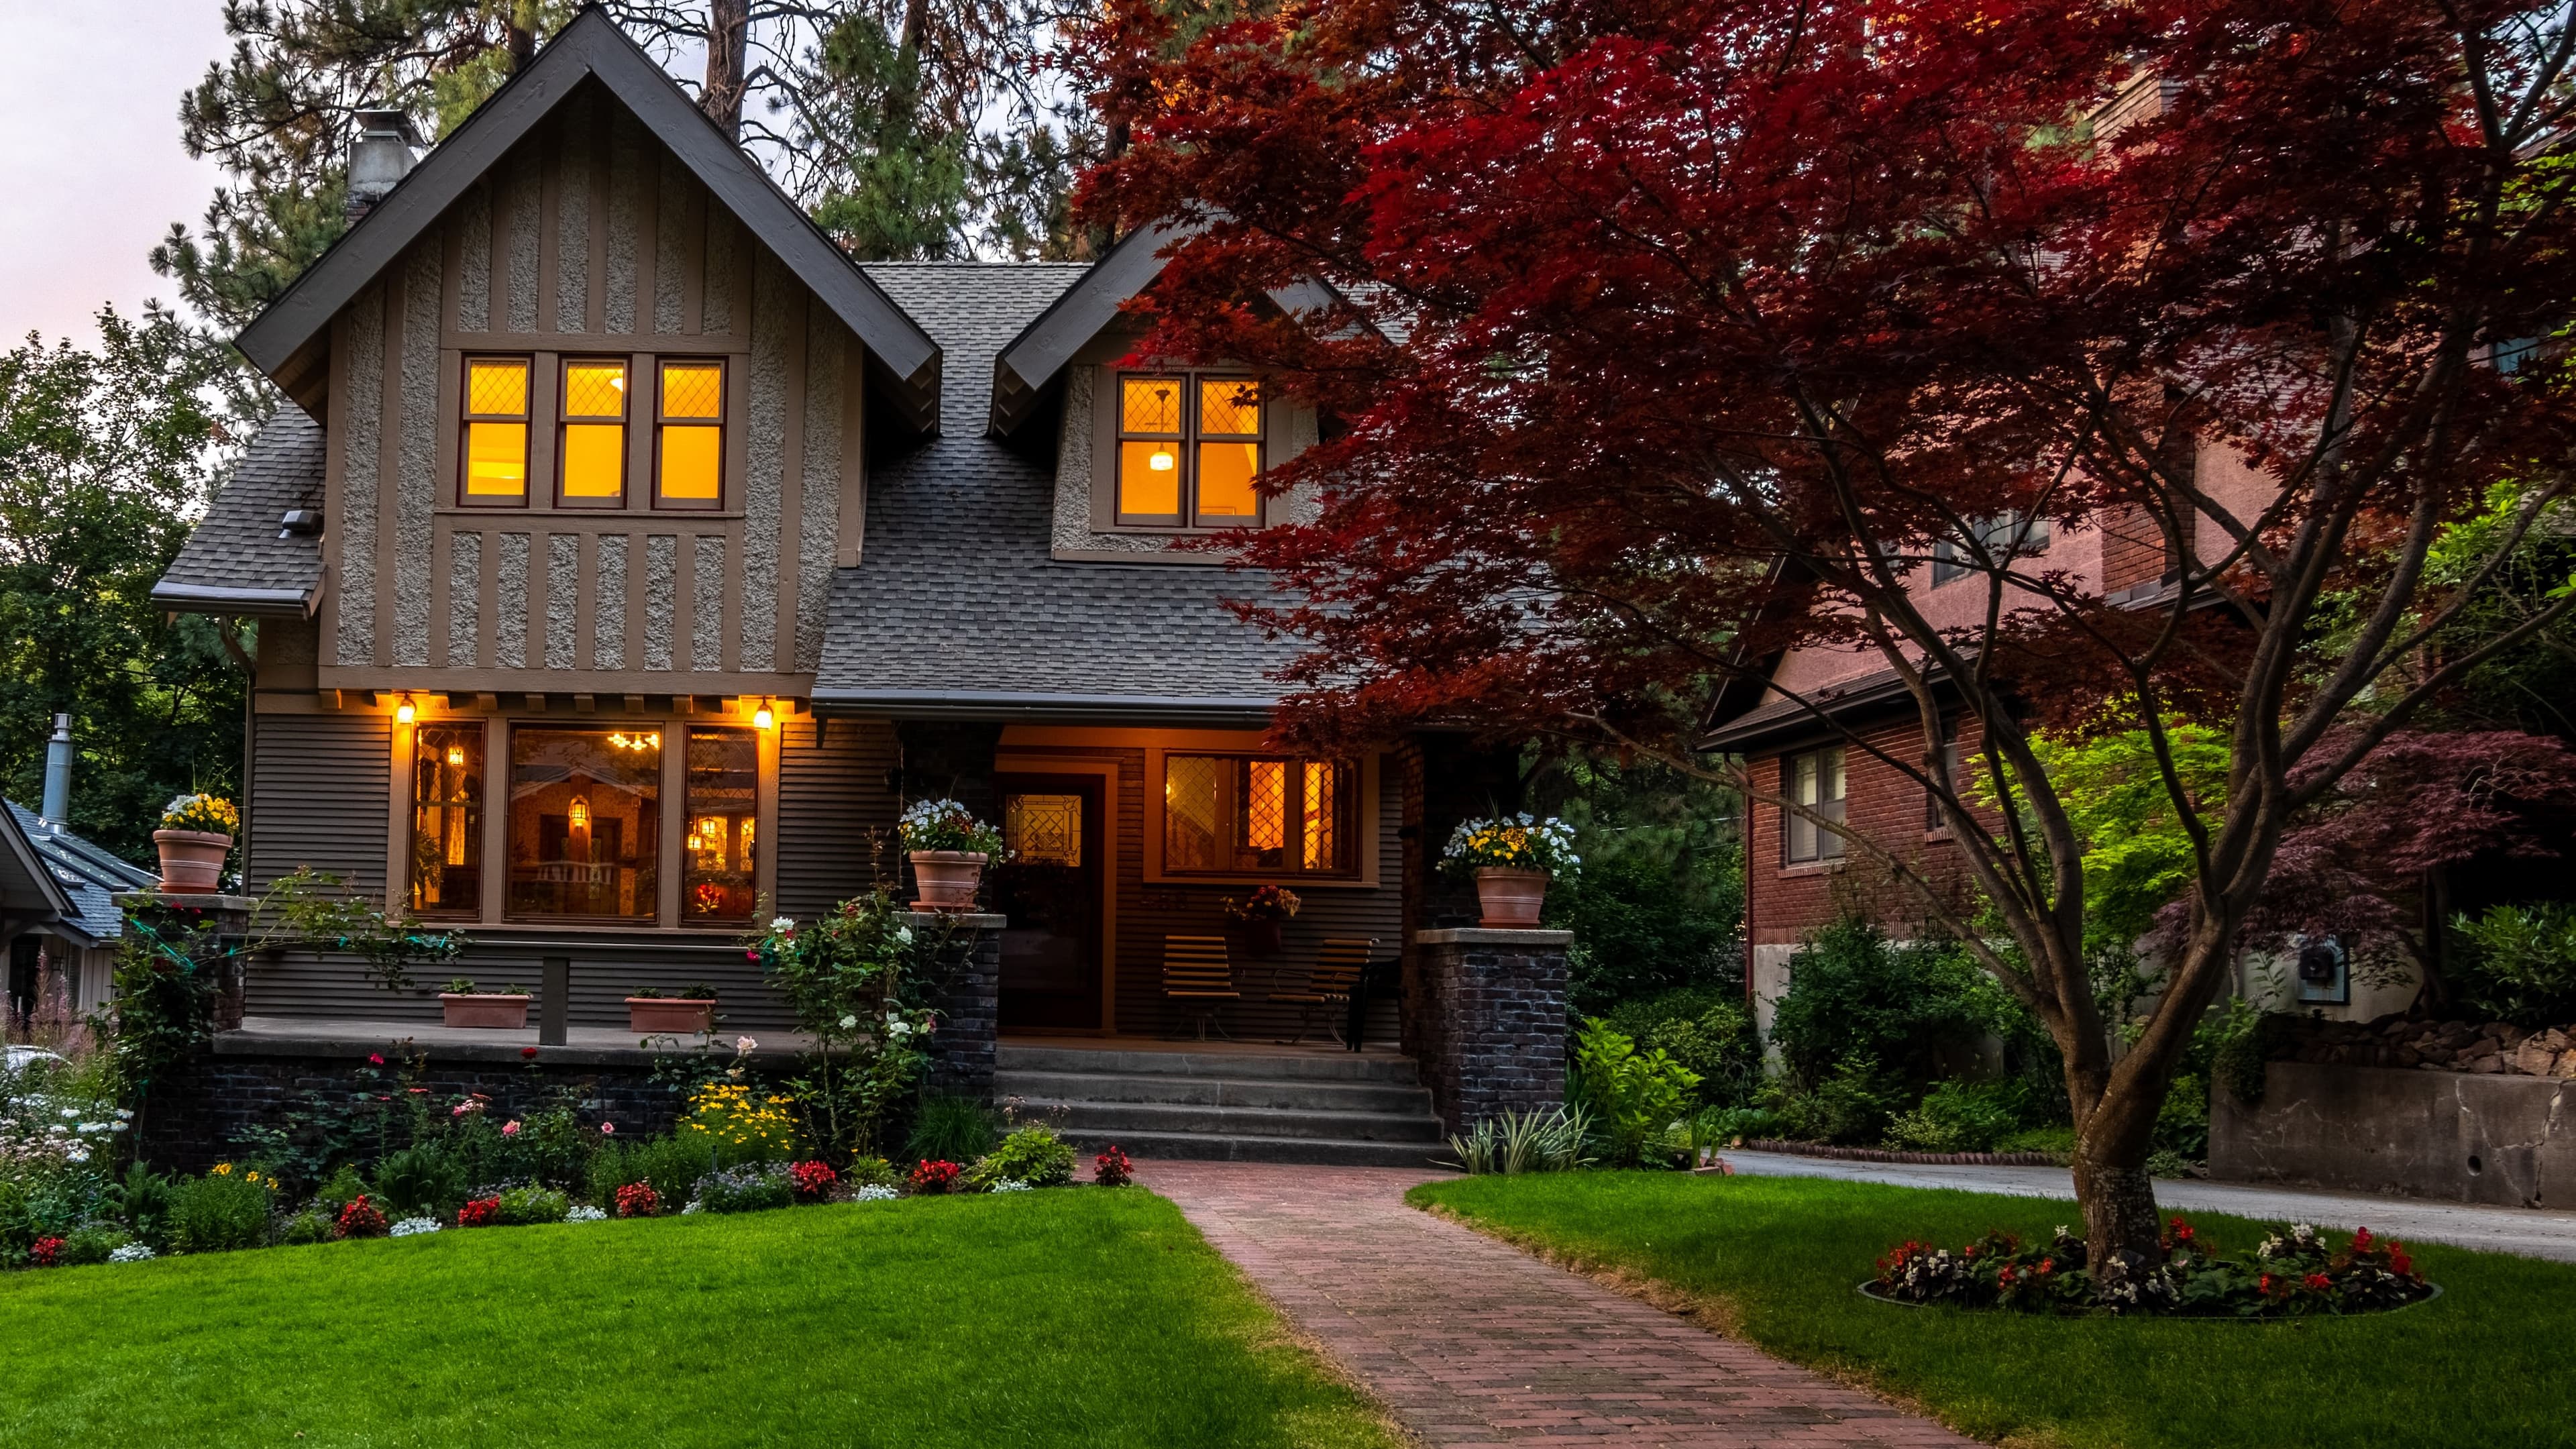 Picture of a suburban home via Pexels